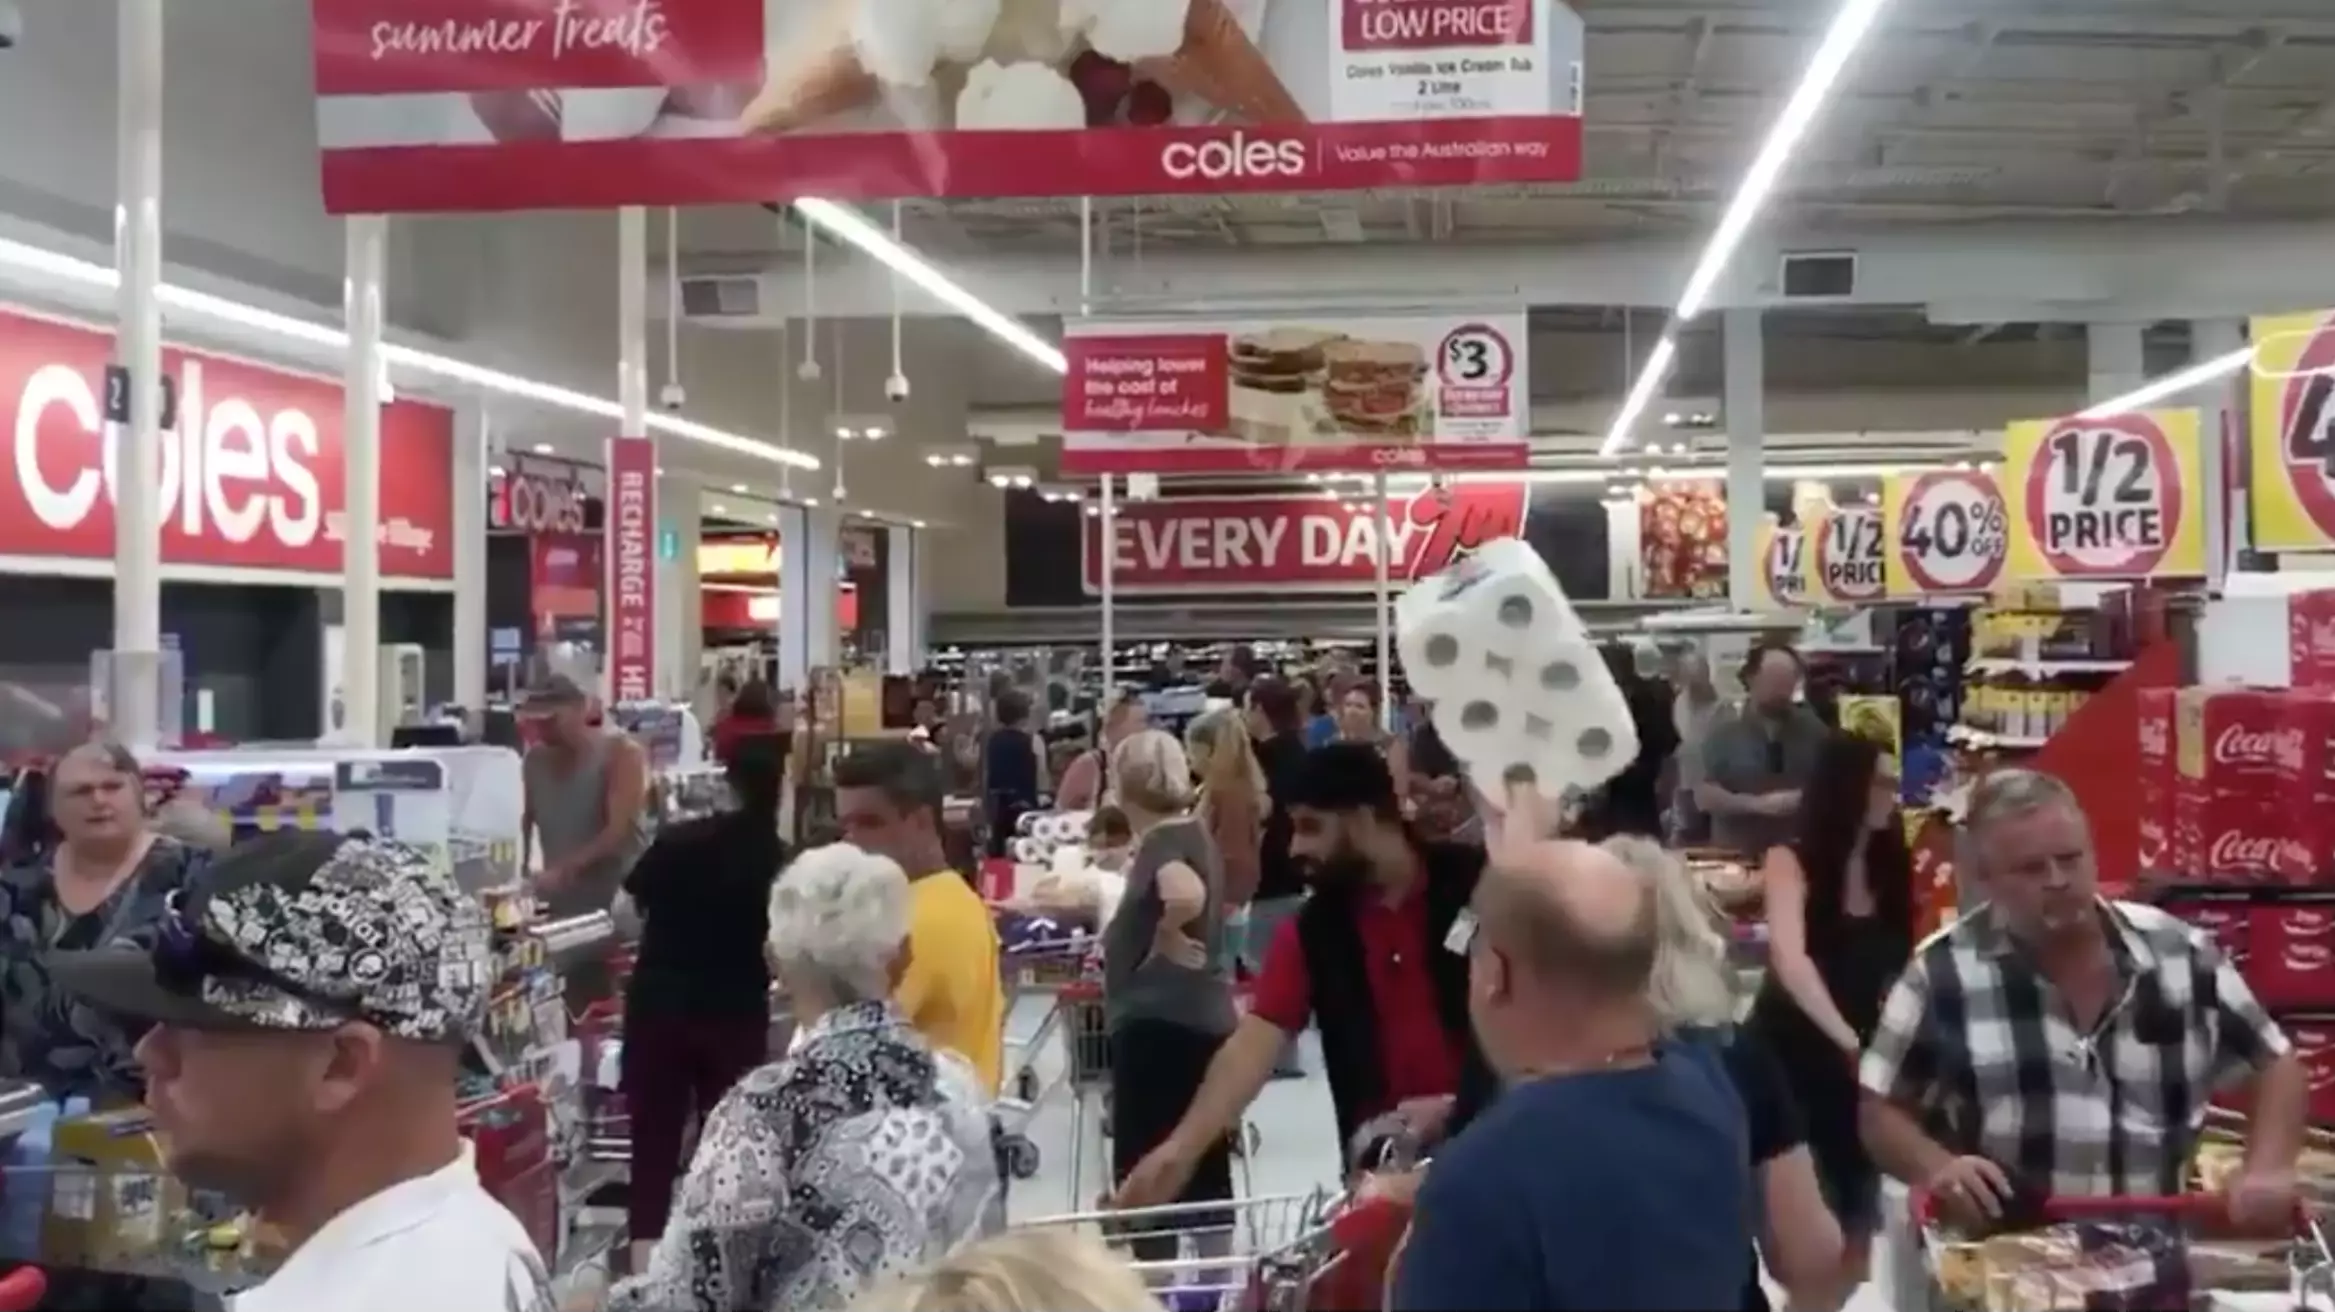 Greater Brisbane Residents Erupt In Panic Buying After Shock 3-Day Lockdown Announcement